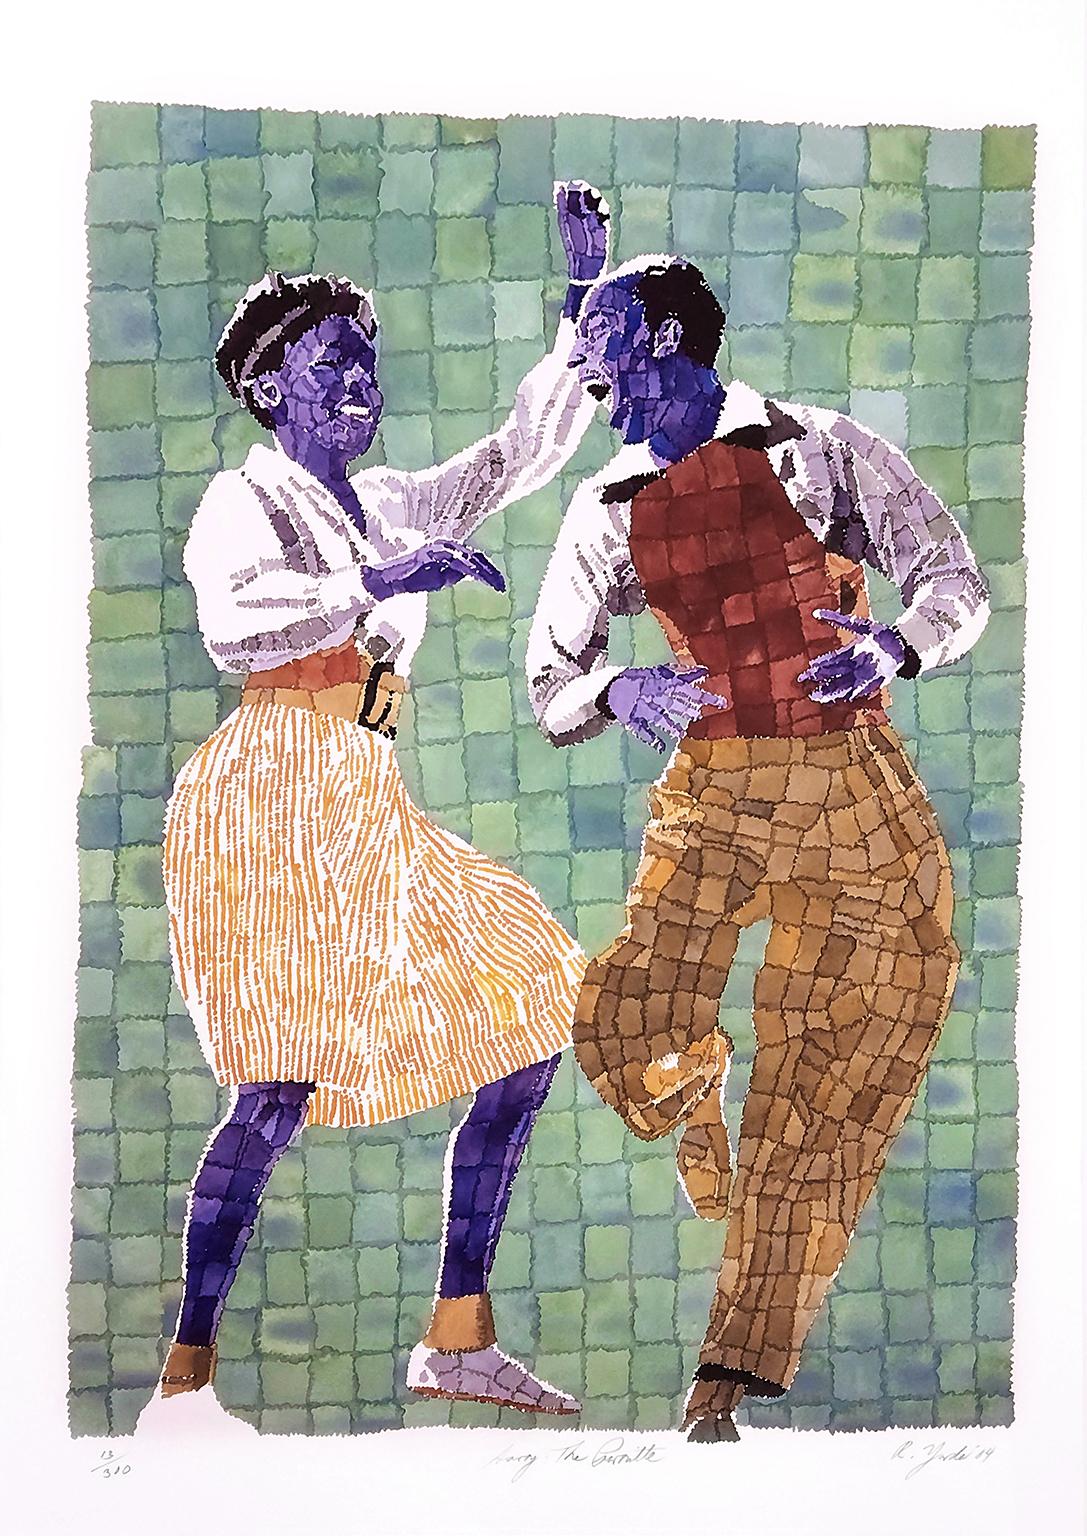 "Savoy: The Pirouette" limited edition giclée on fine art paper of a pair of dancers by African American artist Richard Yarde. Part of Yarde's "Savoy Ballroom" series. Hand-numbered 13/300, titled "Savoy: The Pirouette" and signed R. Yarde '04.